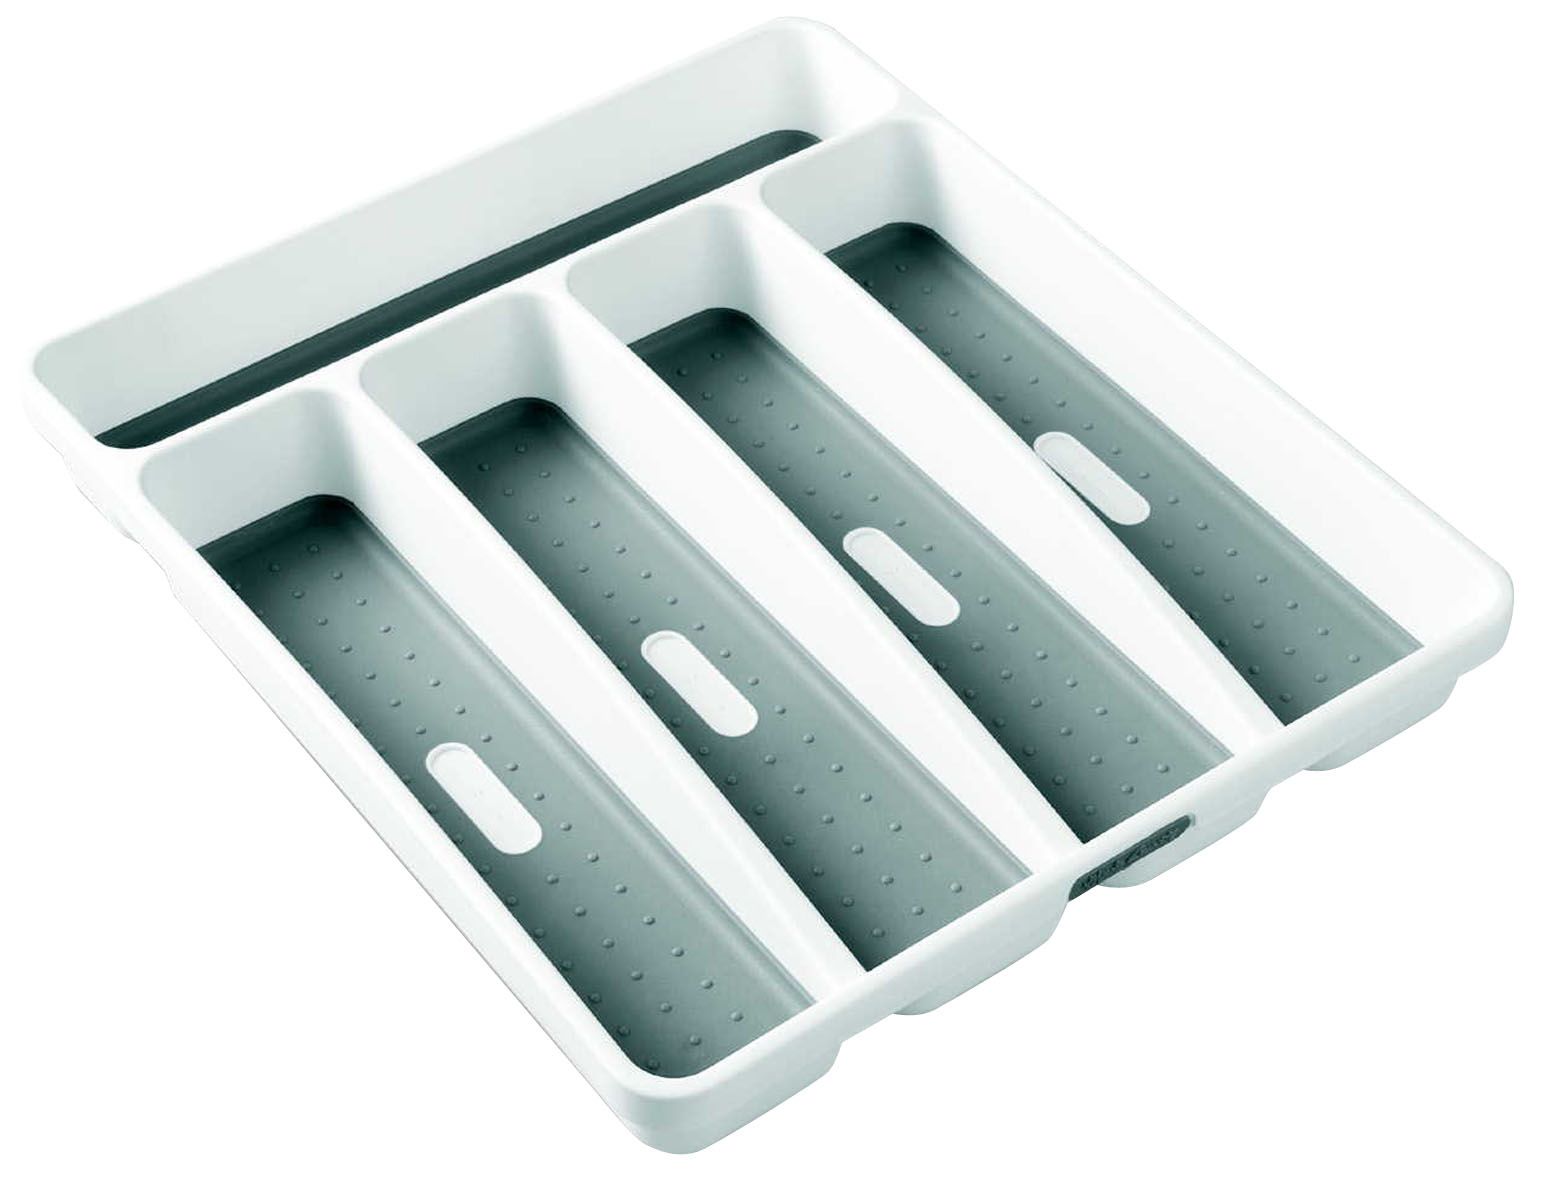 MadeSmart Housewares 5-Compartment Silverware Tray